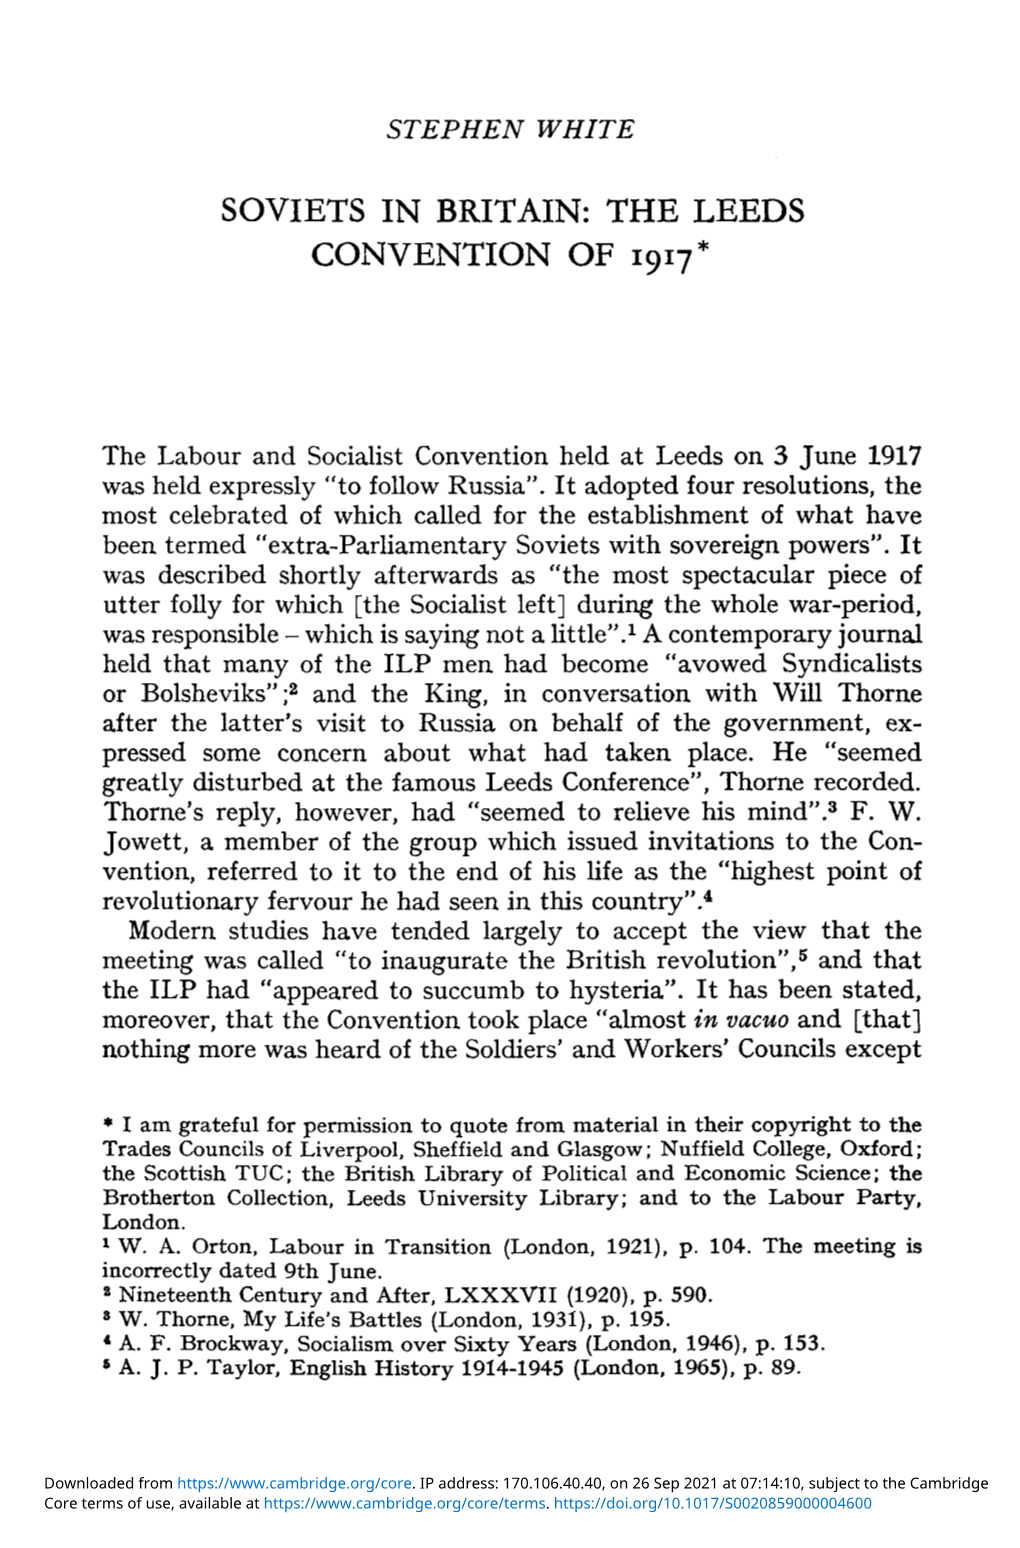 Soviets in Britain: the Leeds Convention of 1917*